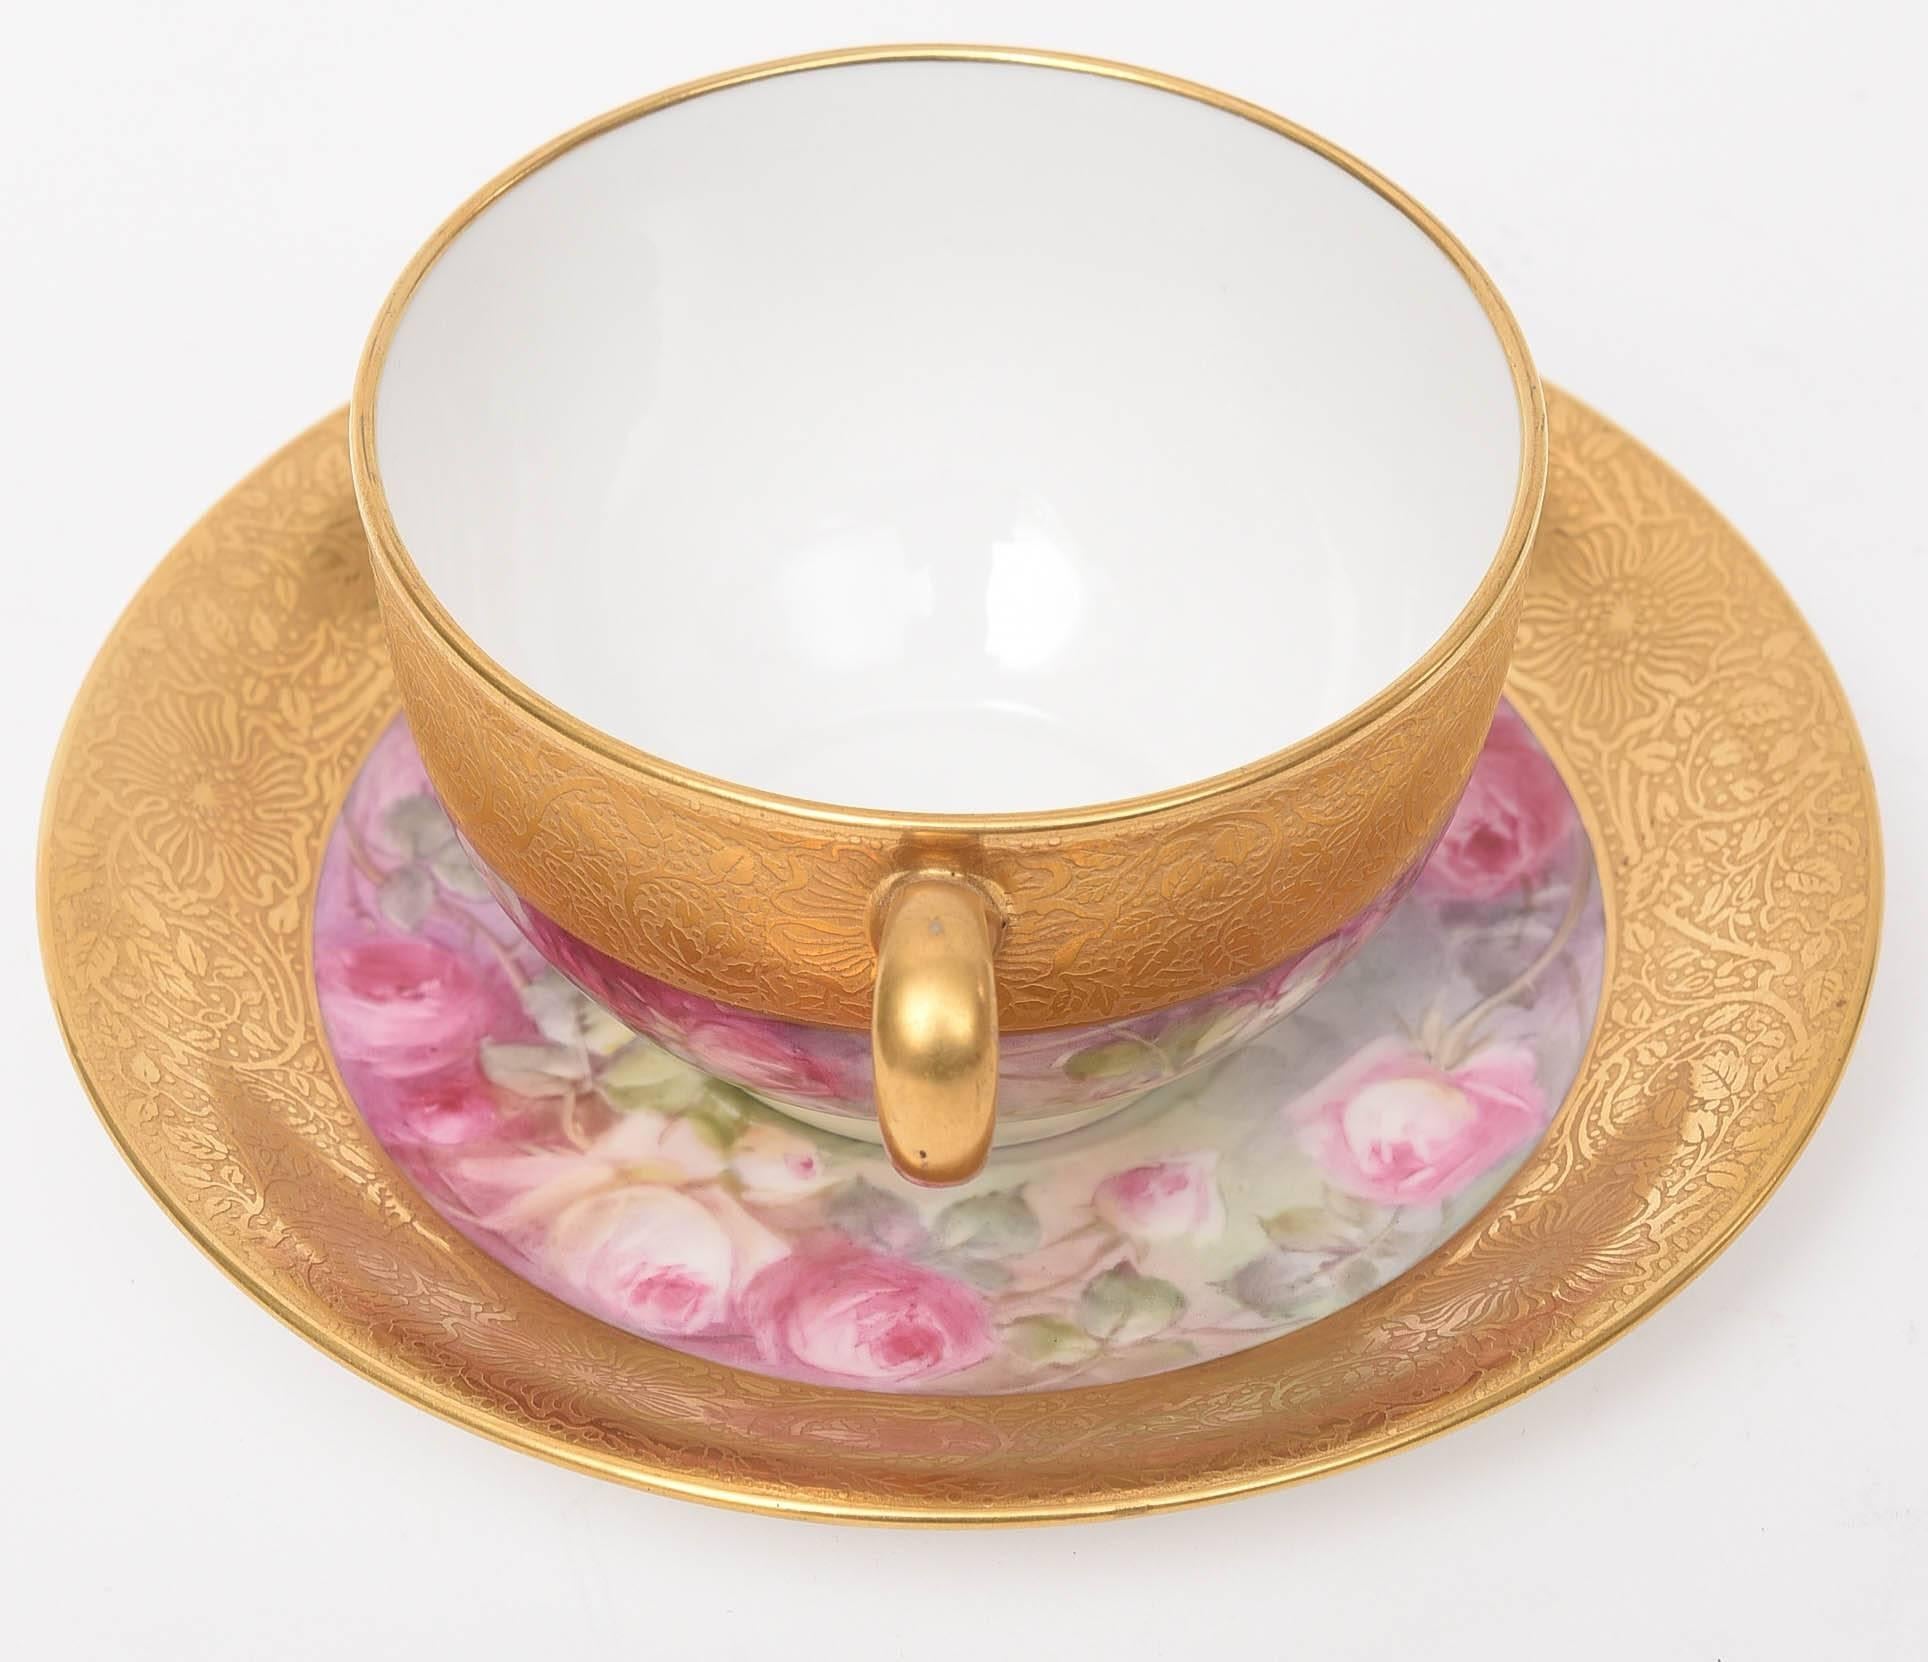 Set of 12 Hand-Painted and Gilt Encrusted Cup and Saucers, 24 Pieces Total For Sale 2